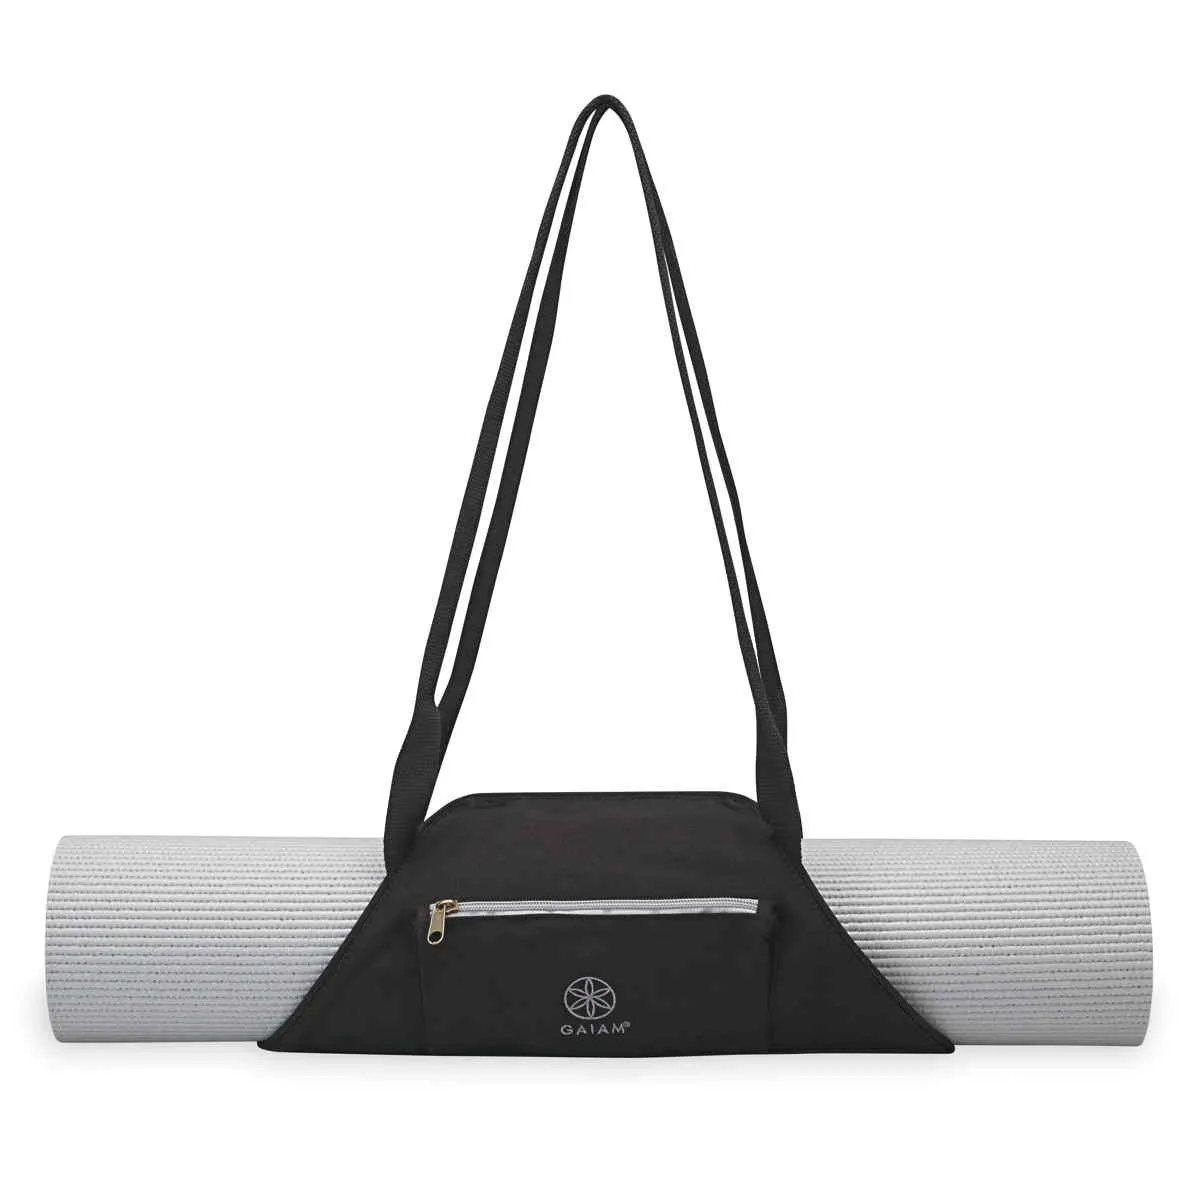 GAIAM yoga mat carrying strap black with logo